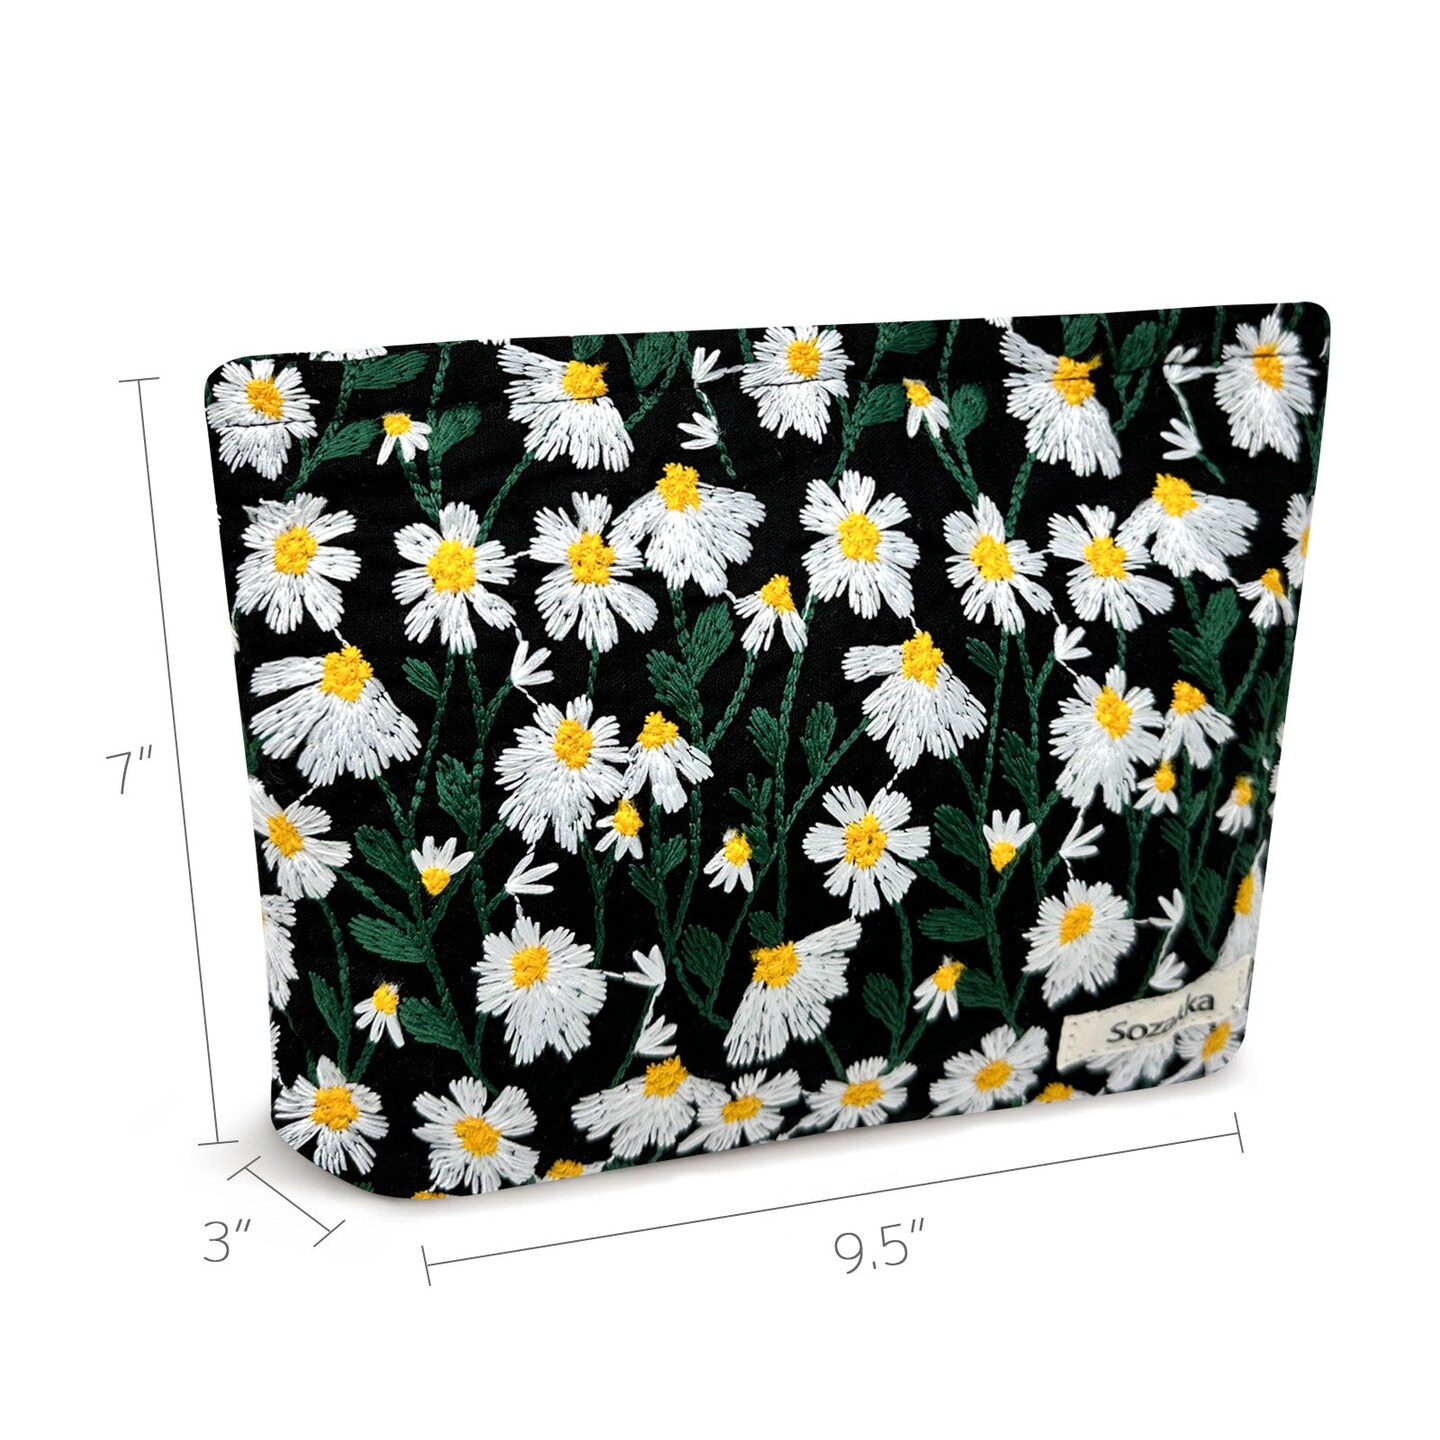 Wrapables Cosmetic Pouch, Makeup and Toiletry Travel Bag, Embroidered Daisy